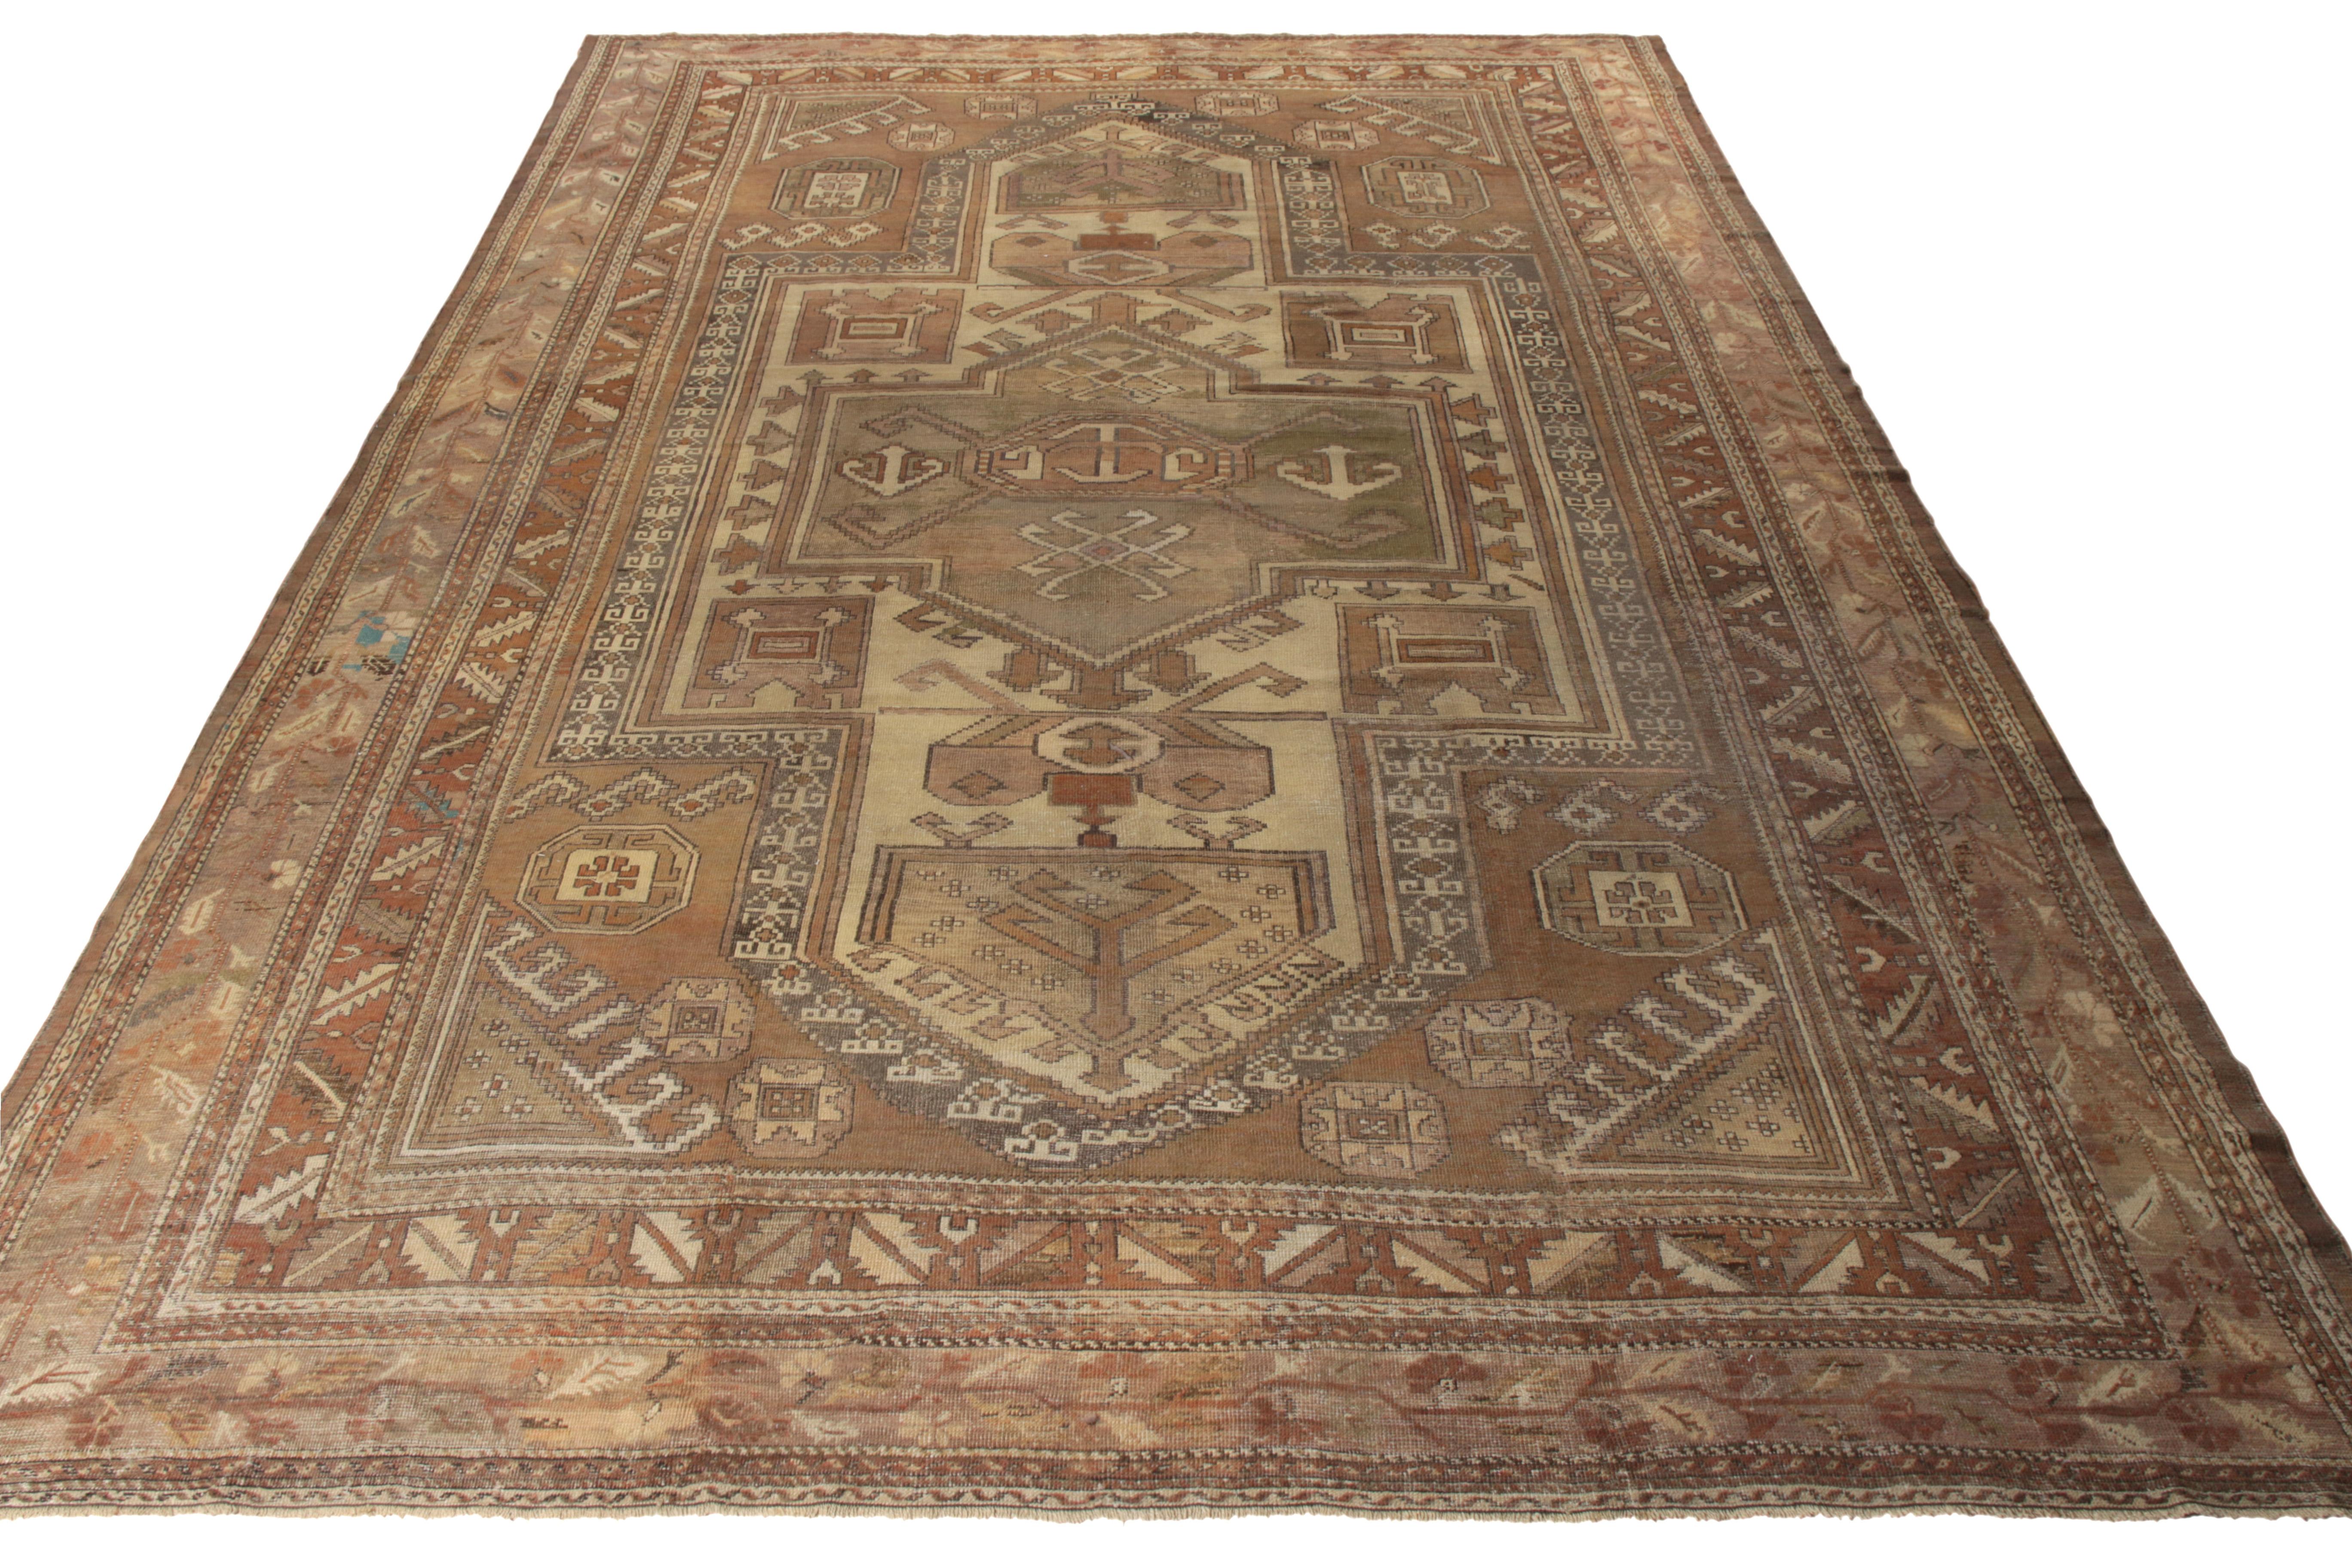 Diligently hand-knotted in wool, a spacious 12x17 antique Turkish Ghiordes entering Rug & Kilim’s Antique & Vintage collection. Originating from Turkey circa 1890-1900, this late-19th-century rug witnesses a medley of medallion and geometric